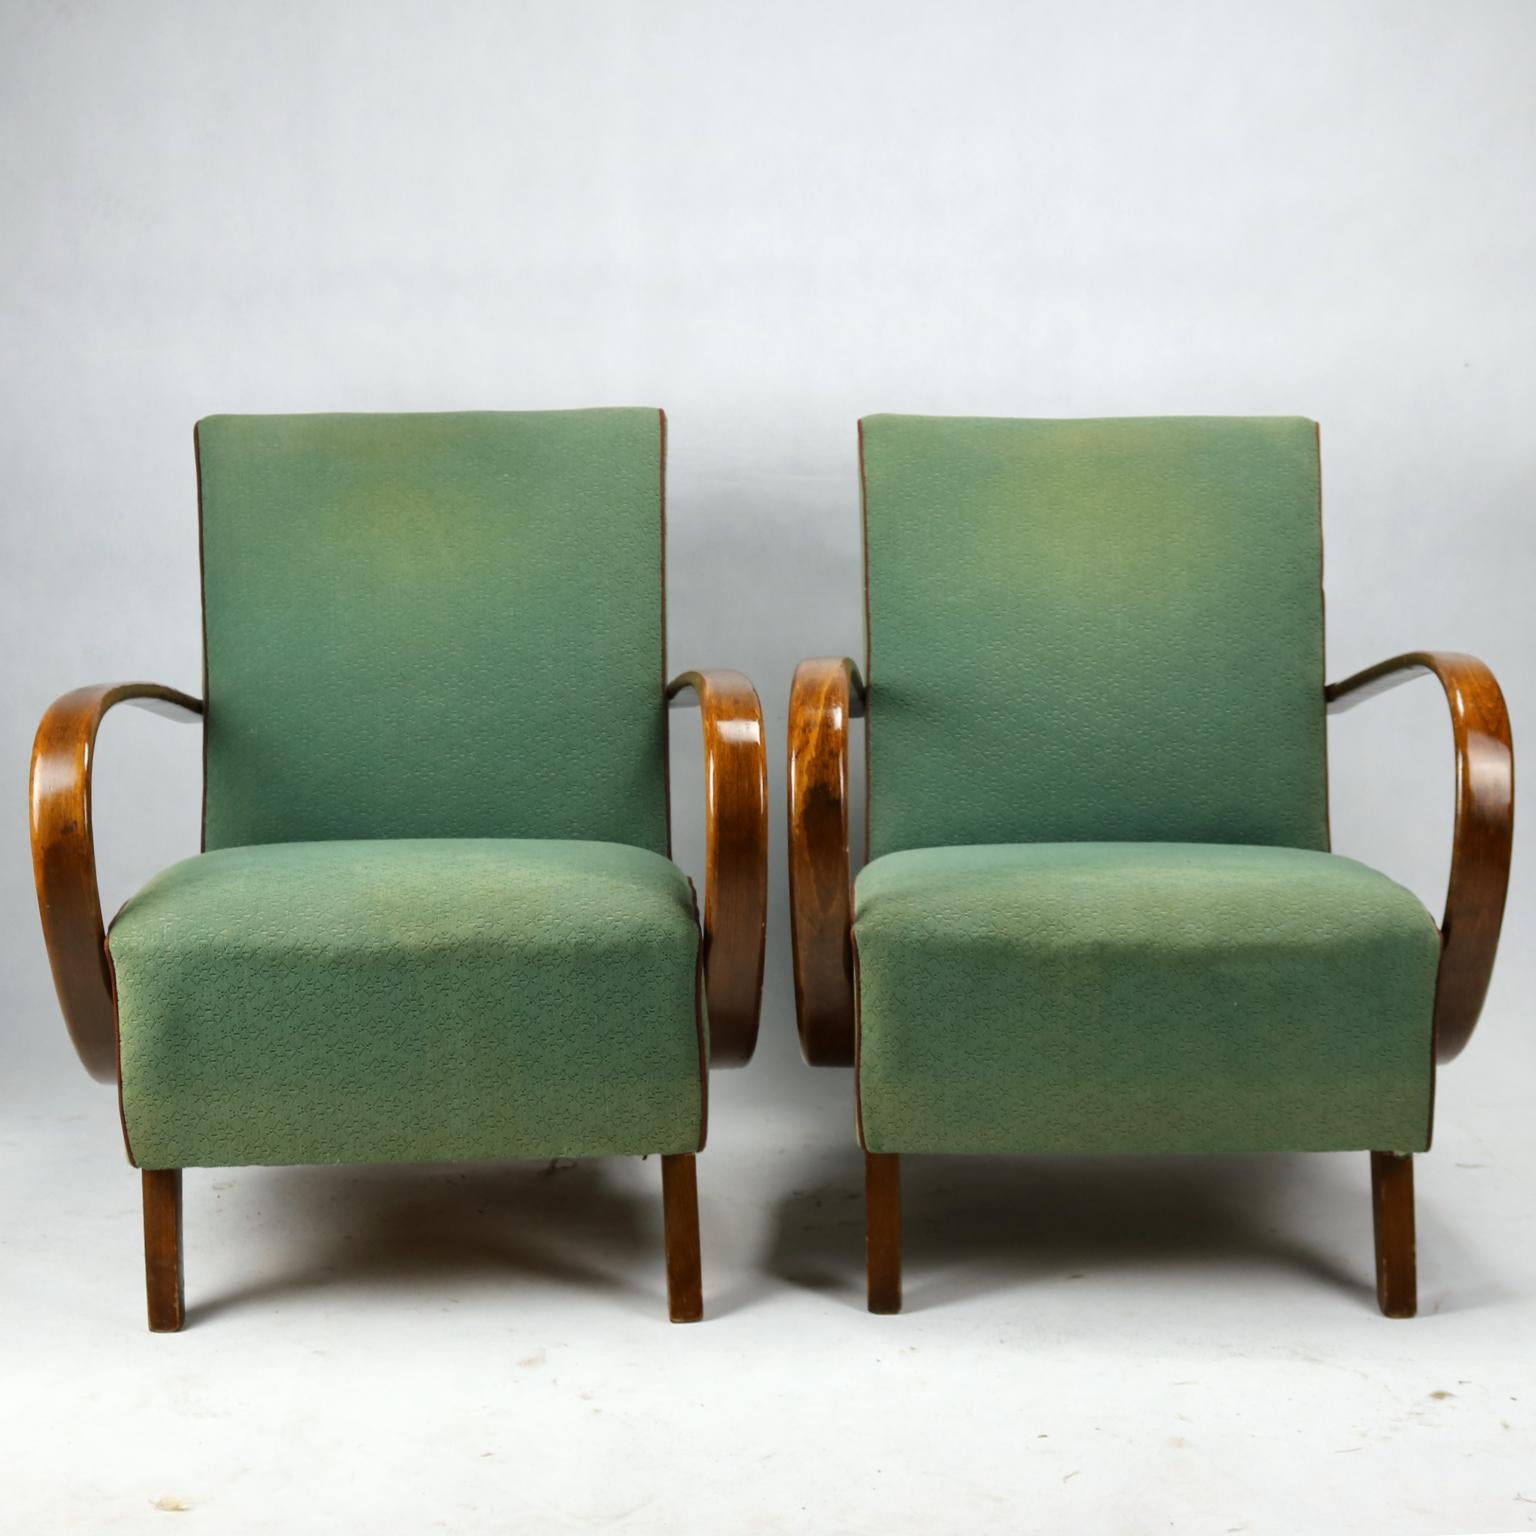 This lounge chairs, model No. 2, were designed by Jindrich Halabala and produced in  Czechoslovakia in the 1930s by UP Zavody Brno. The chairs features curved armrests and legs made from stained beech and are upholstered in original fabric. The